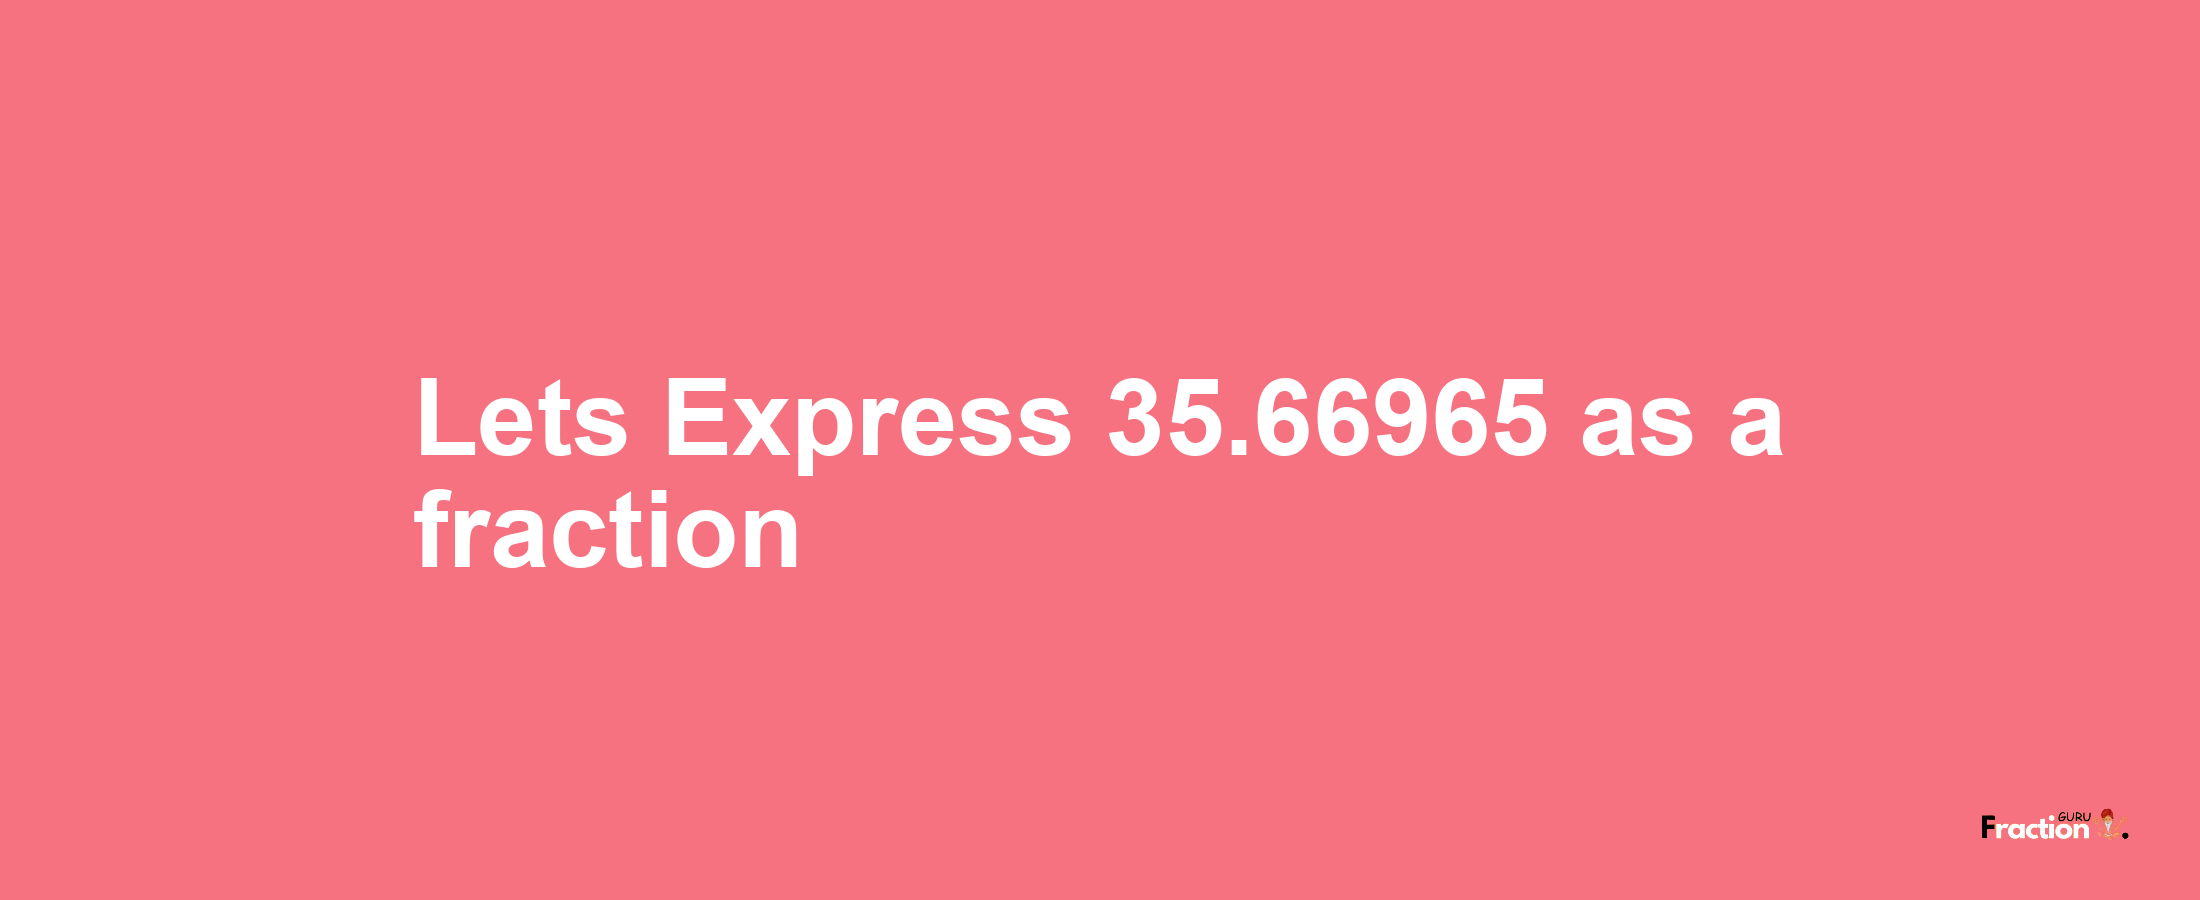 Lets Express 35.66965 as afraction